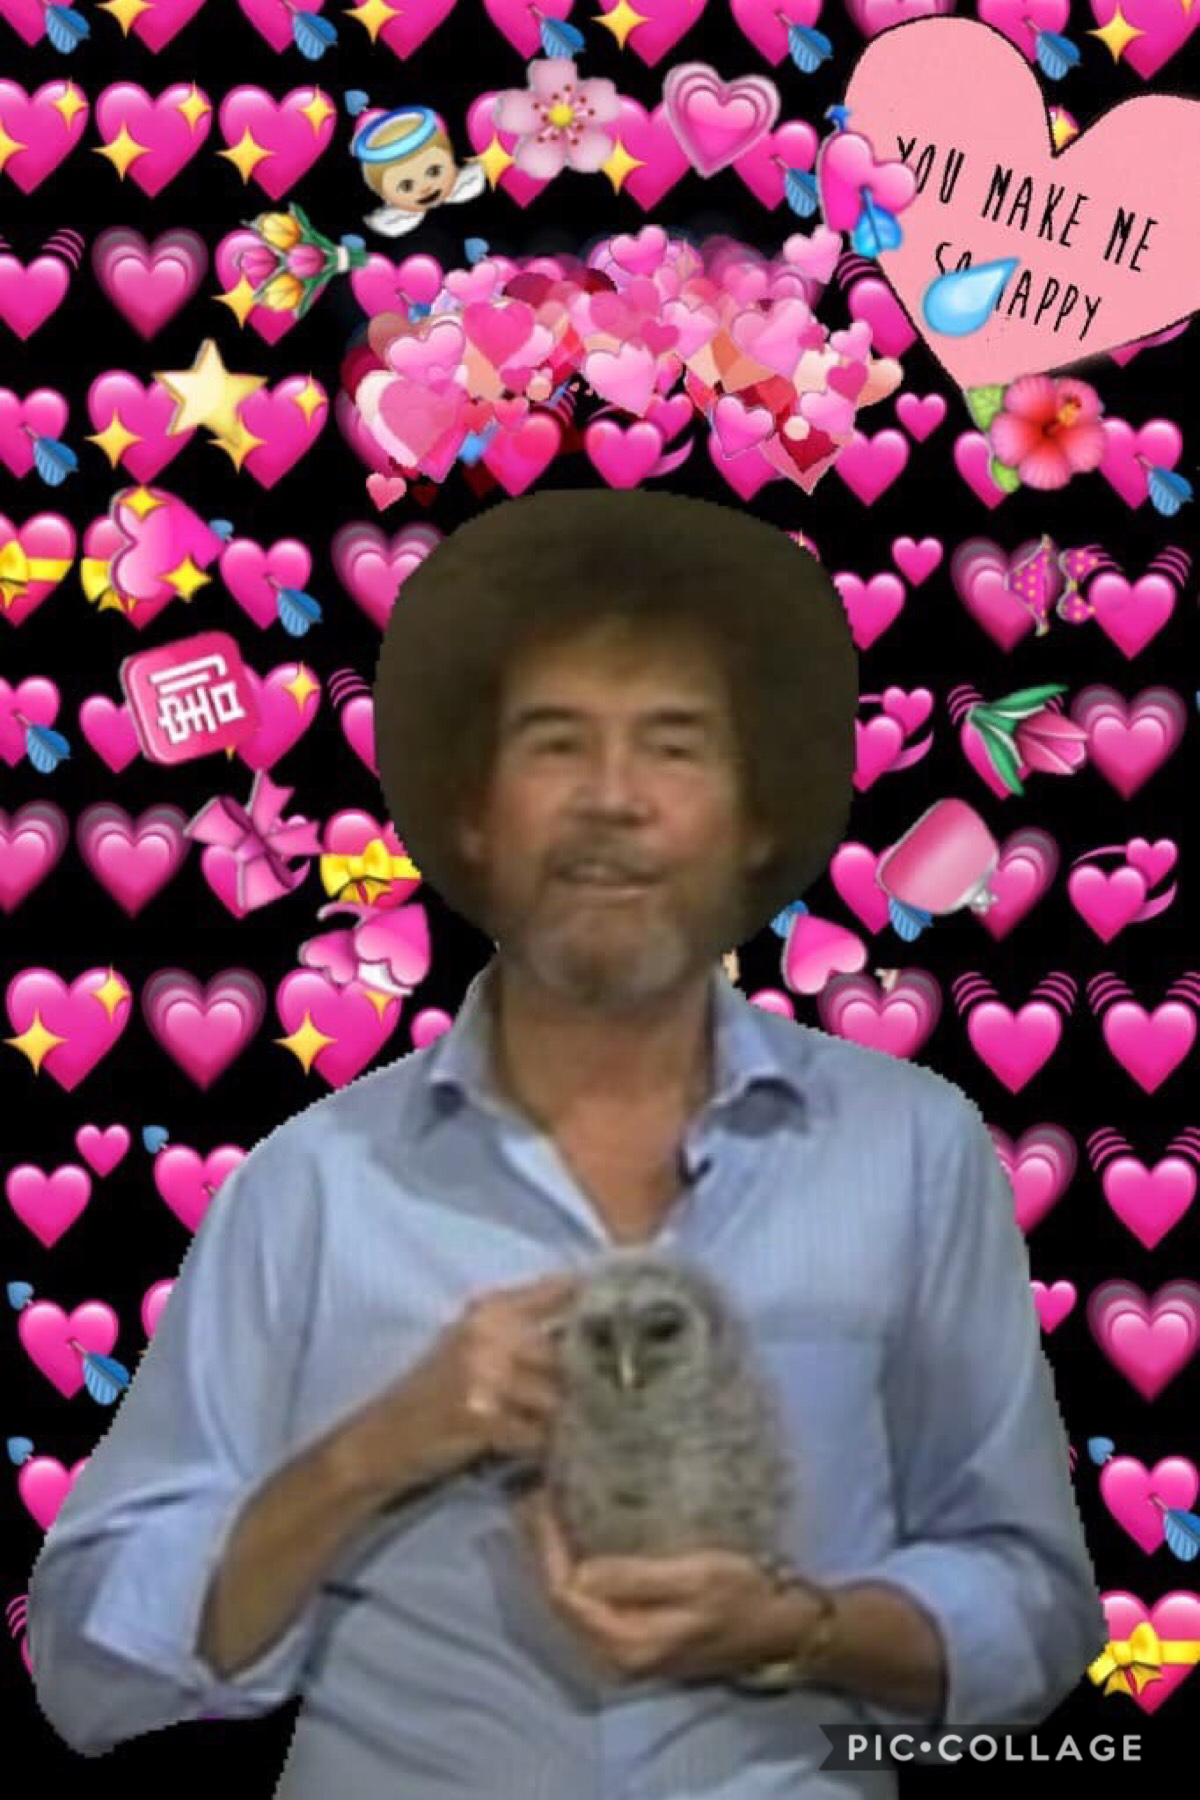 Made by R_Iver🌲
8/13/2018
Remix Bob Ross collages and I’ll post them with credit 